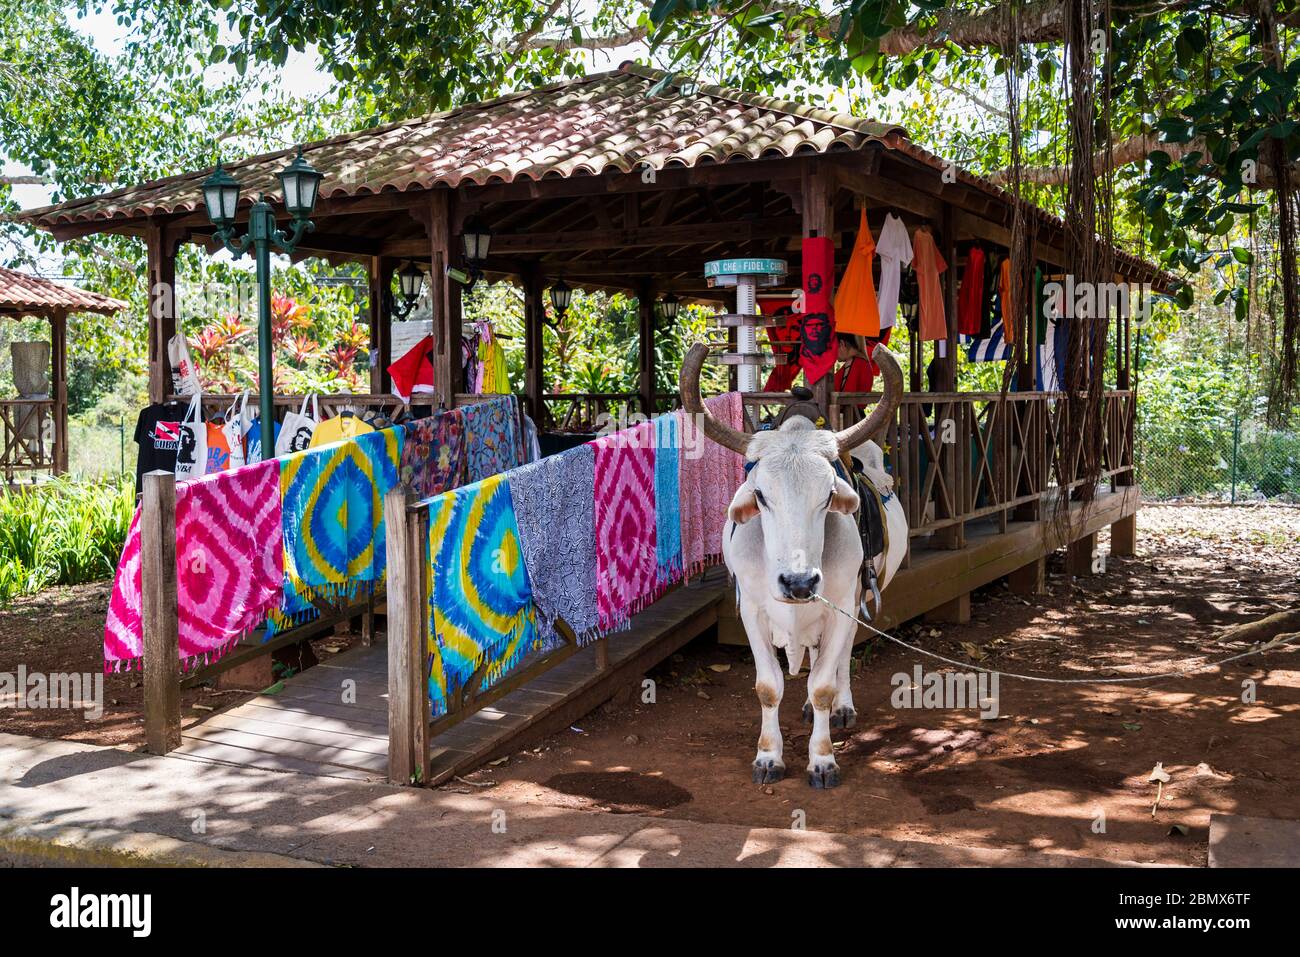 Oxen and shop with local crafts, Vinales Valley, Cuba Stock Photo